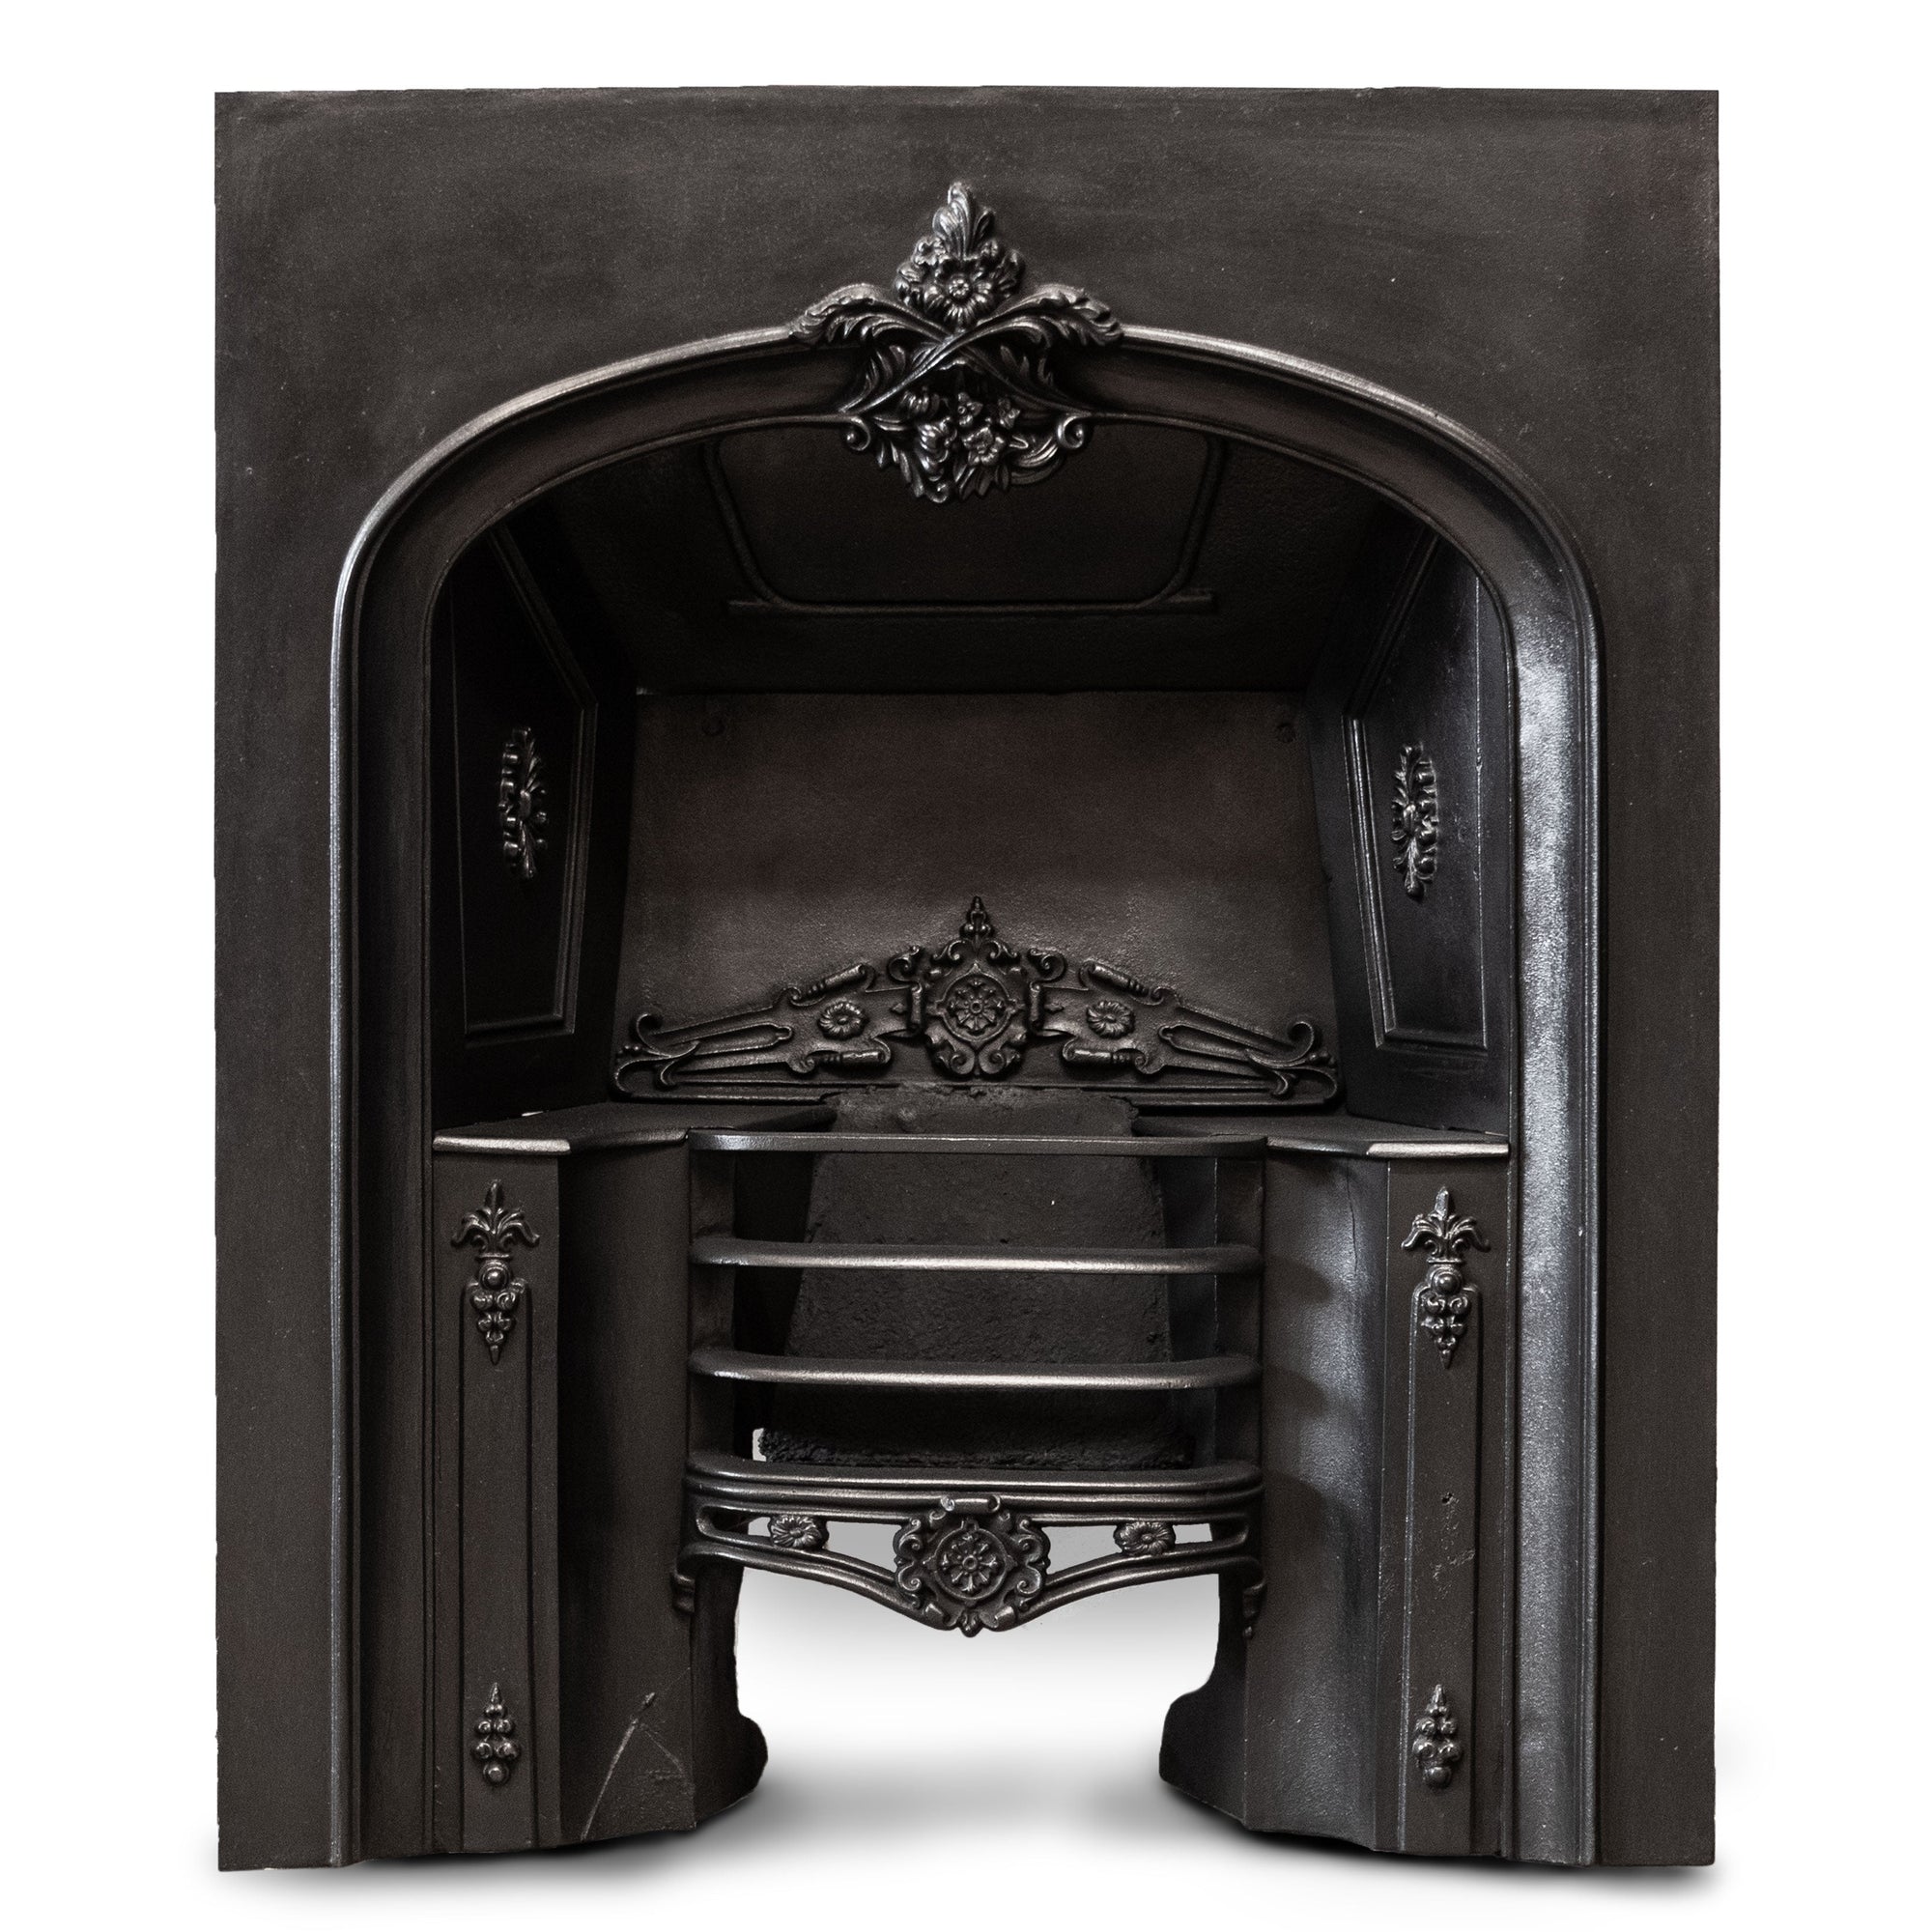 Antique Ornate Early Victorian Cast Iron Fireplace Insert | The Architectural Forum